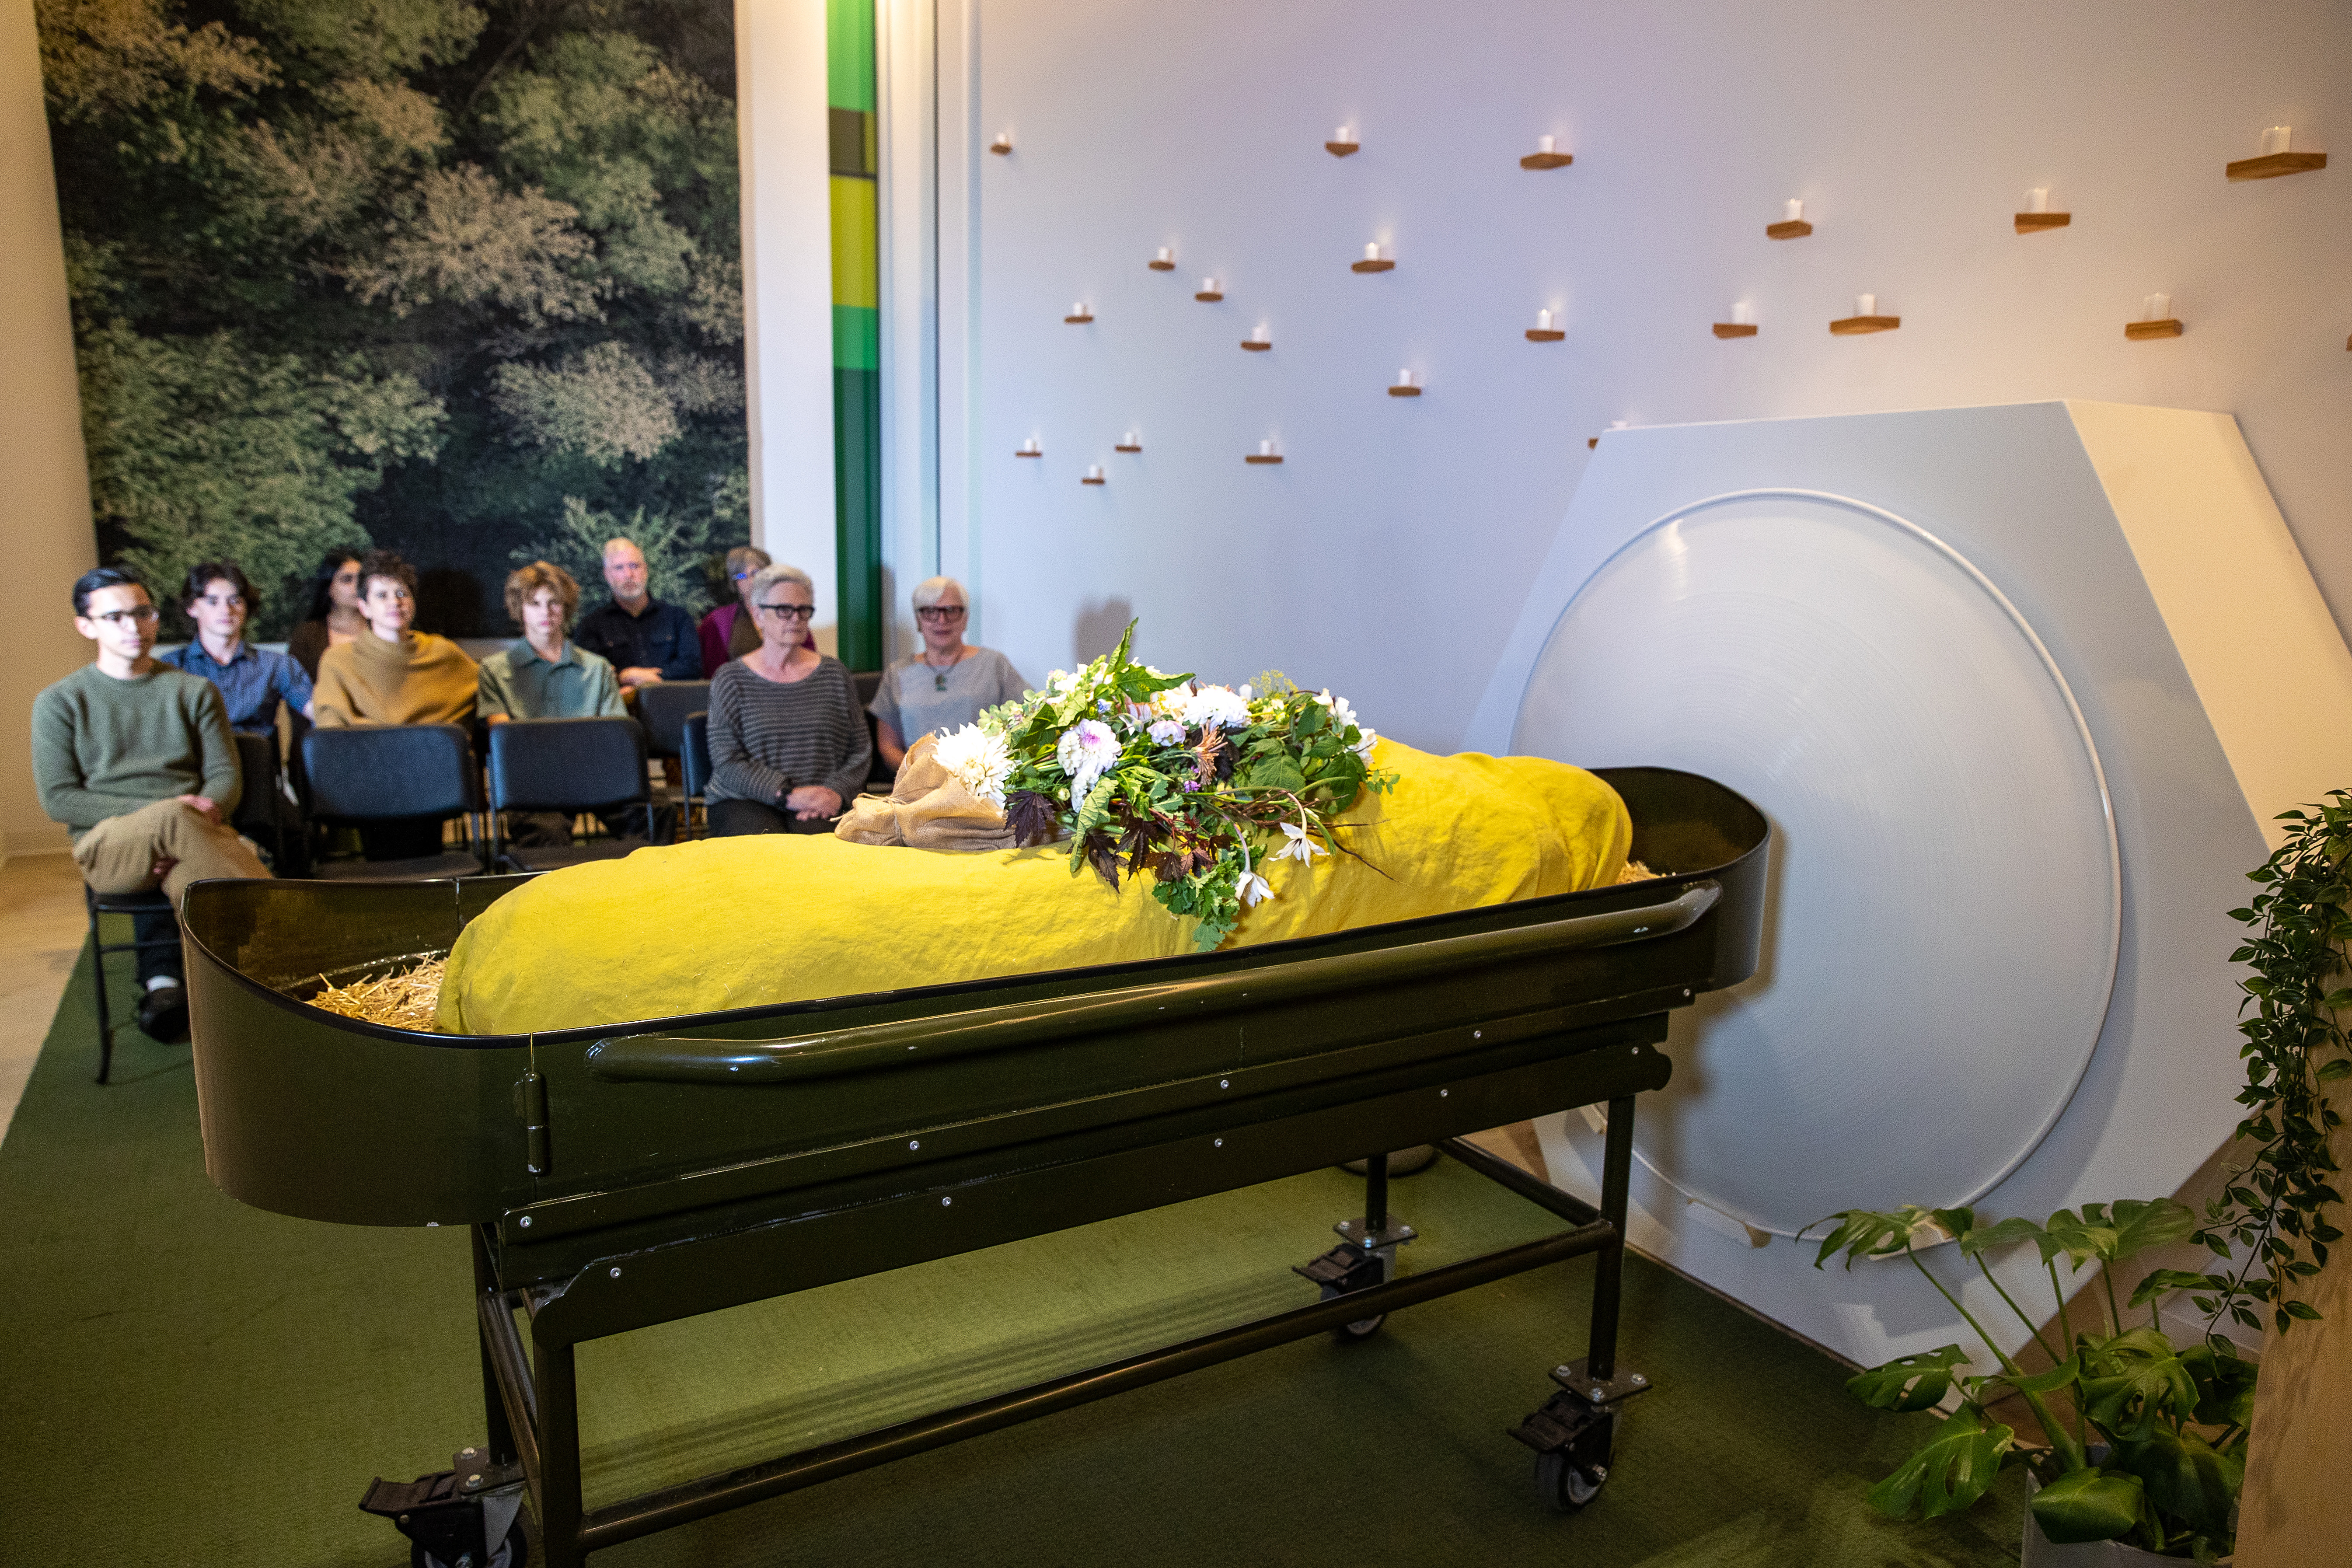 A staged funeral service with a mannequin wrapped in yellow cloth to symbolize the body